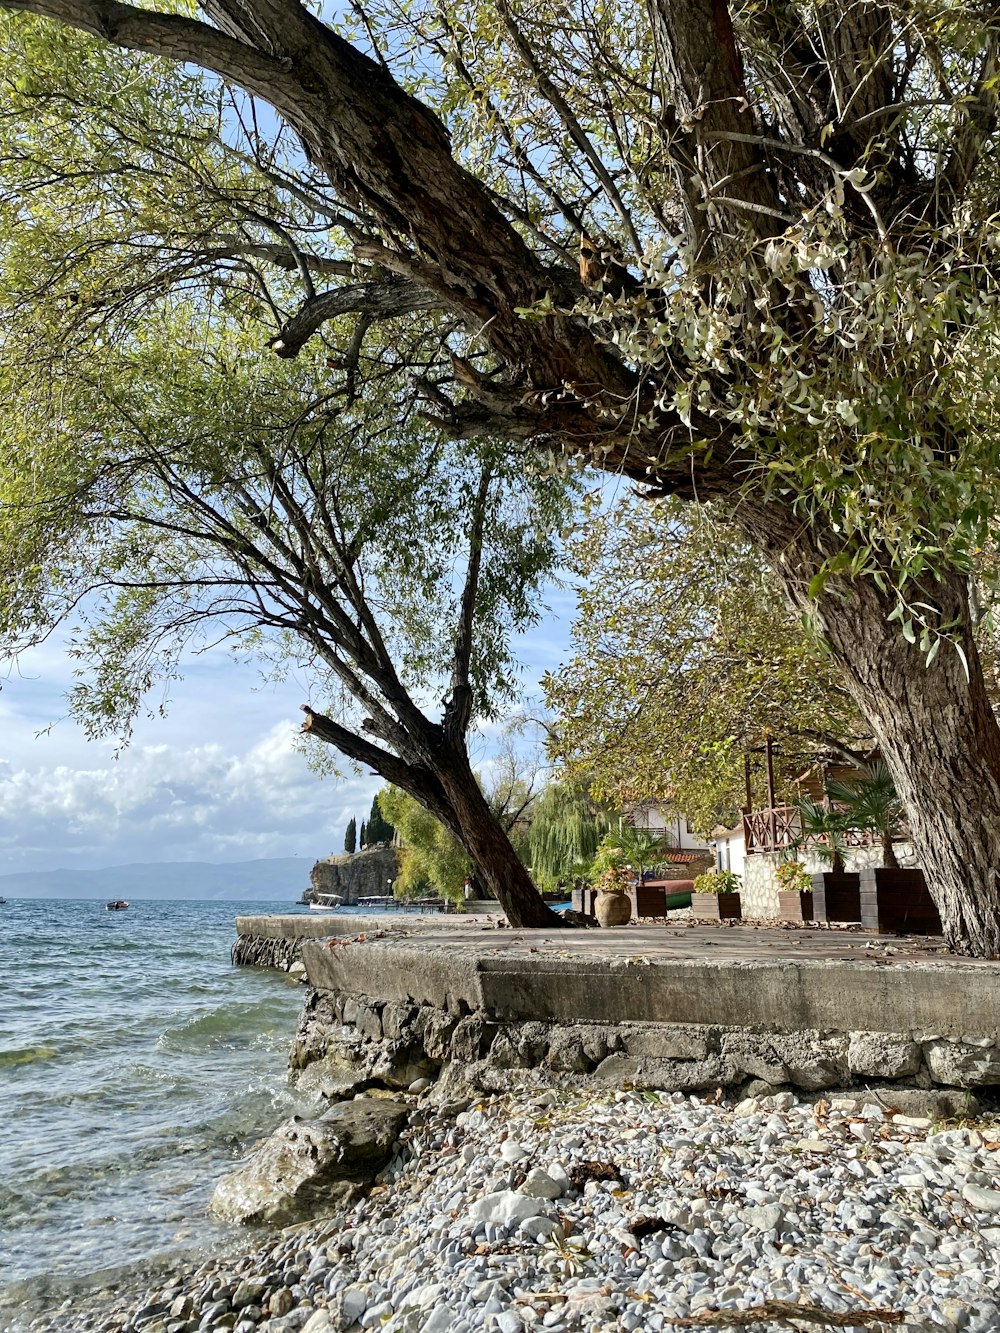 a bench sitting under a tree next to a body of water